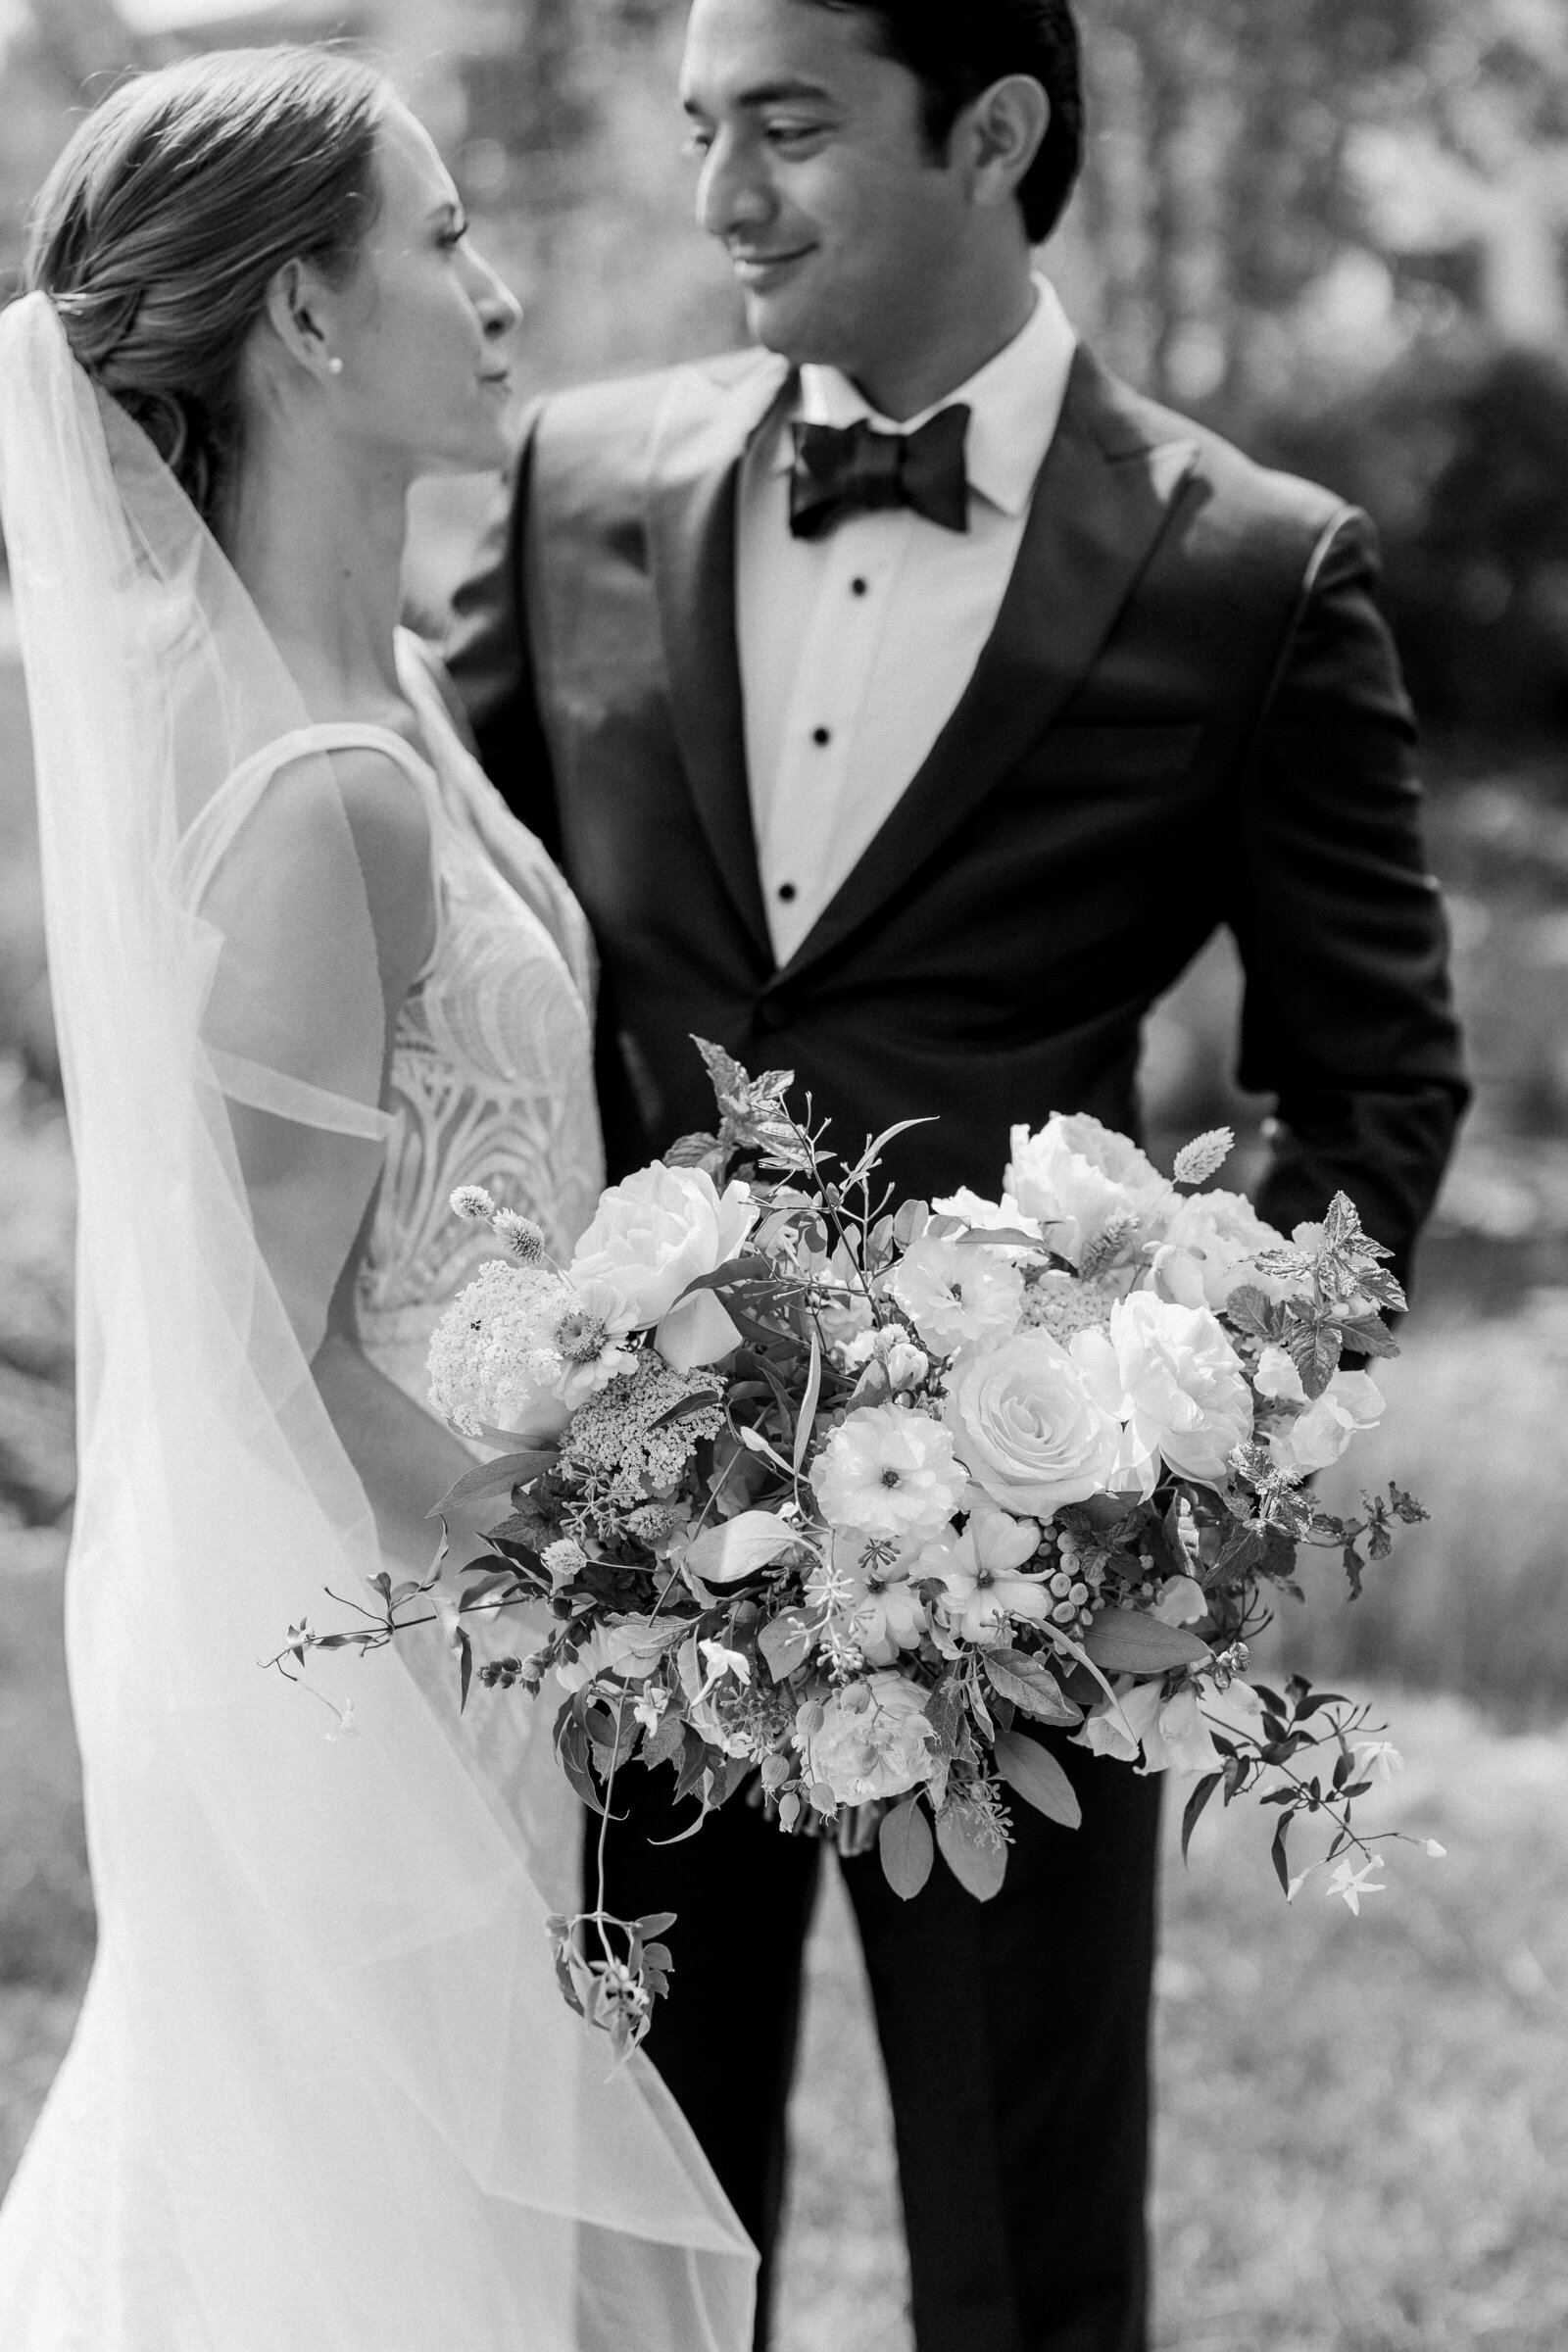 Black and white photo of a wedding couple smiling at each other while one holds a bouquet of flowers.